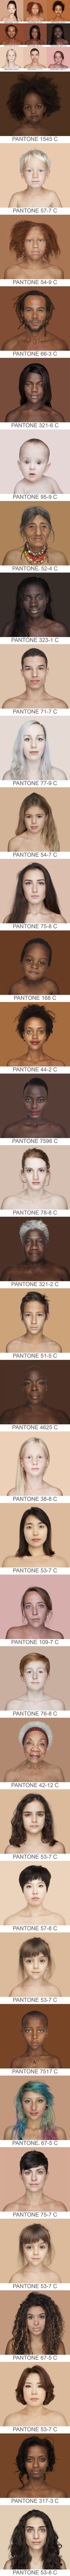 Photographer to capture every skin tone in the world for a human pantone project